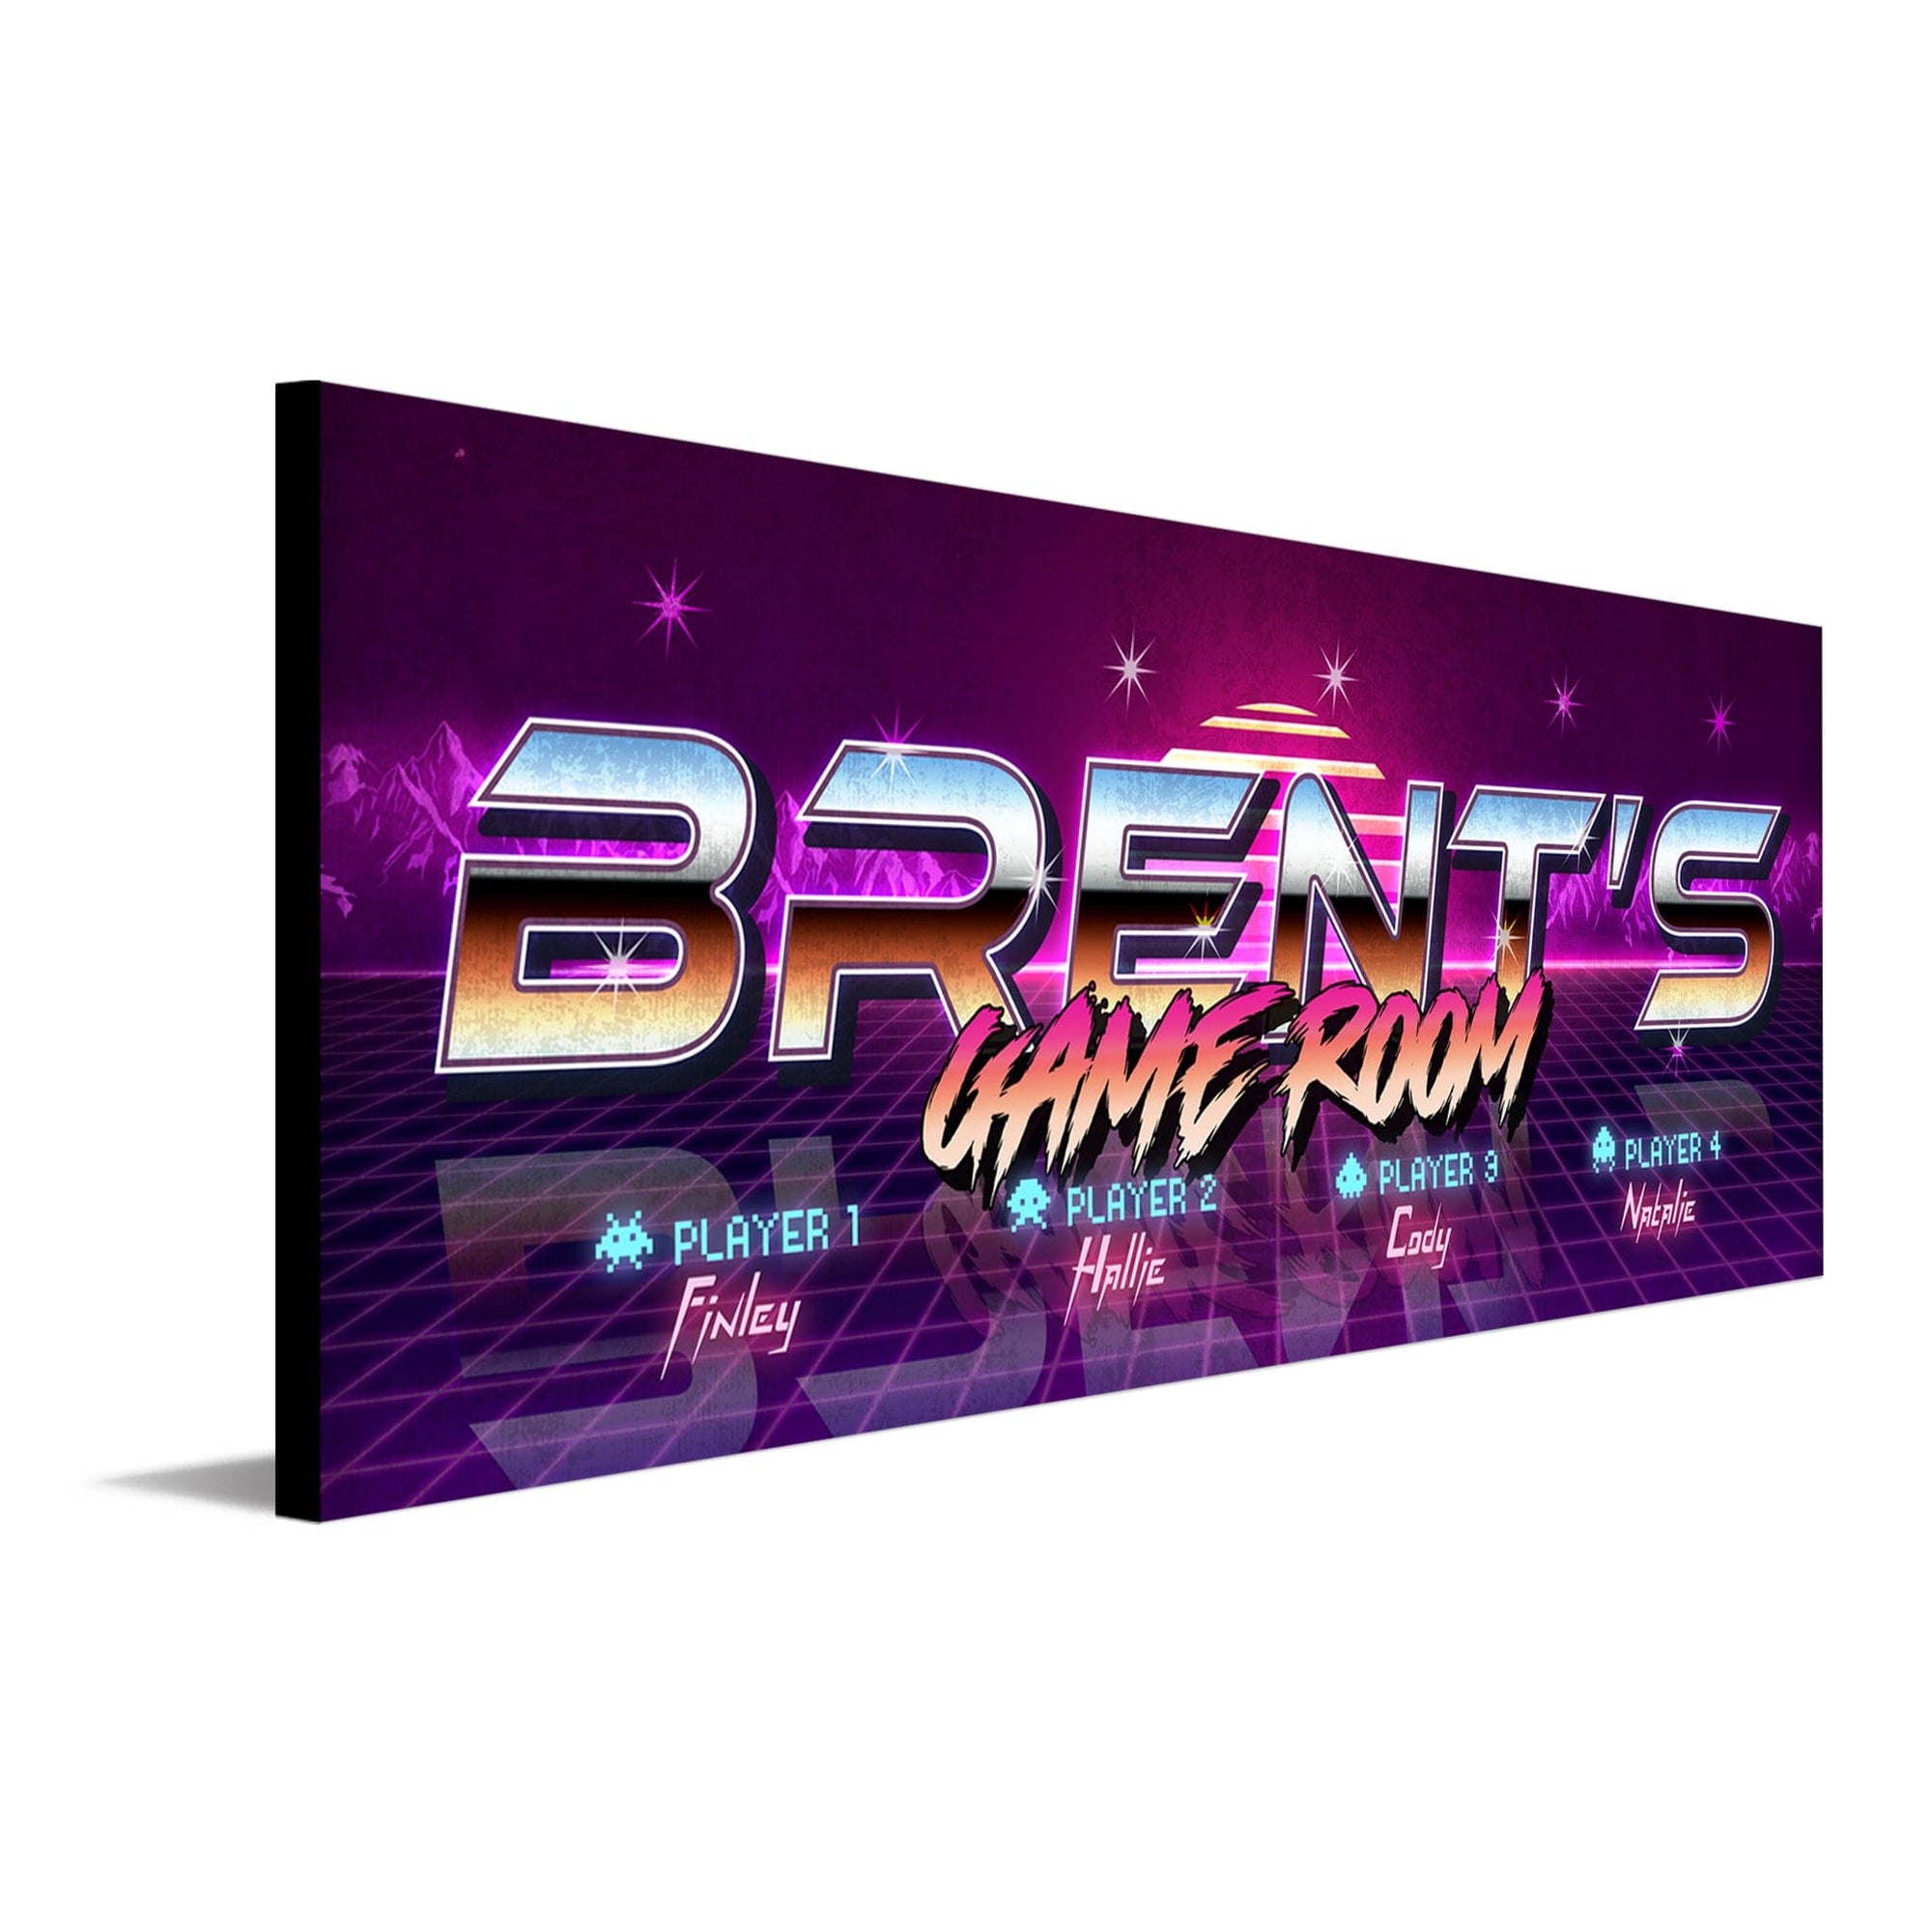 Personalized gift for gamer from Personal Prints - Customized Retro Video Game Sign